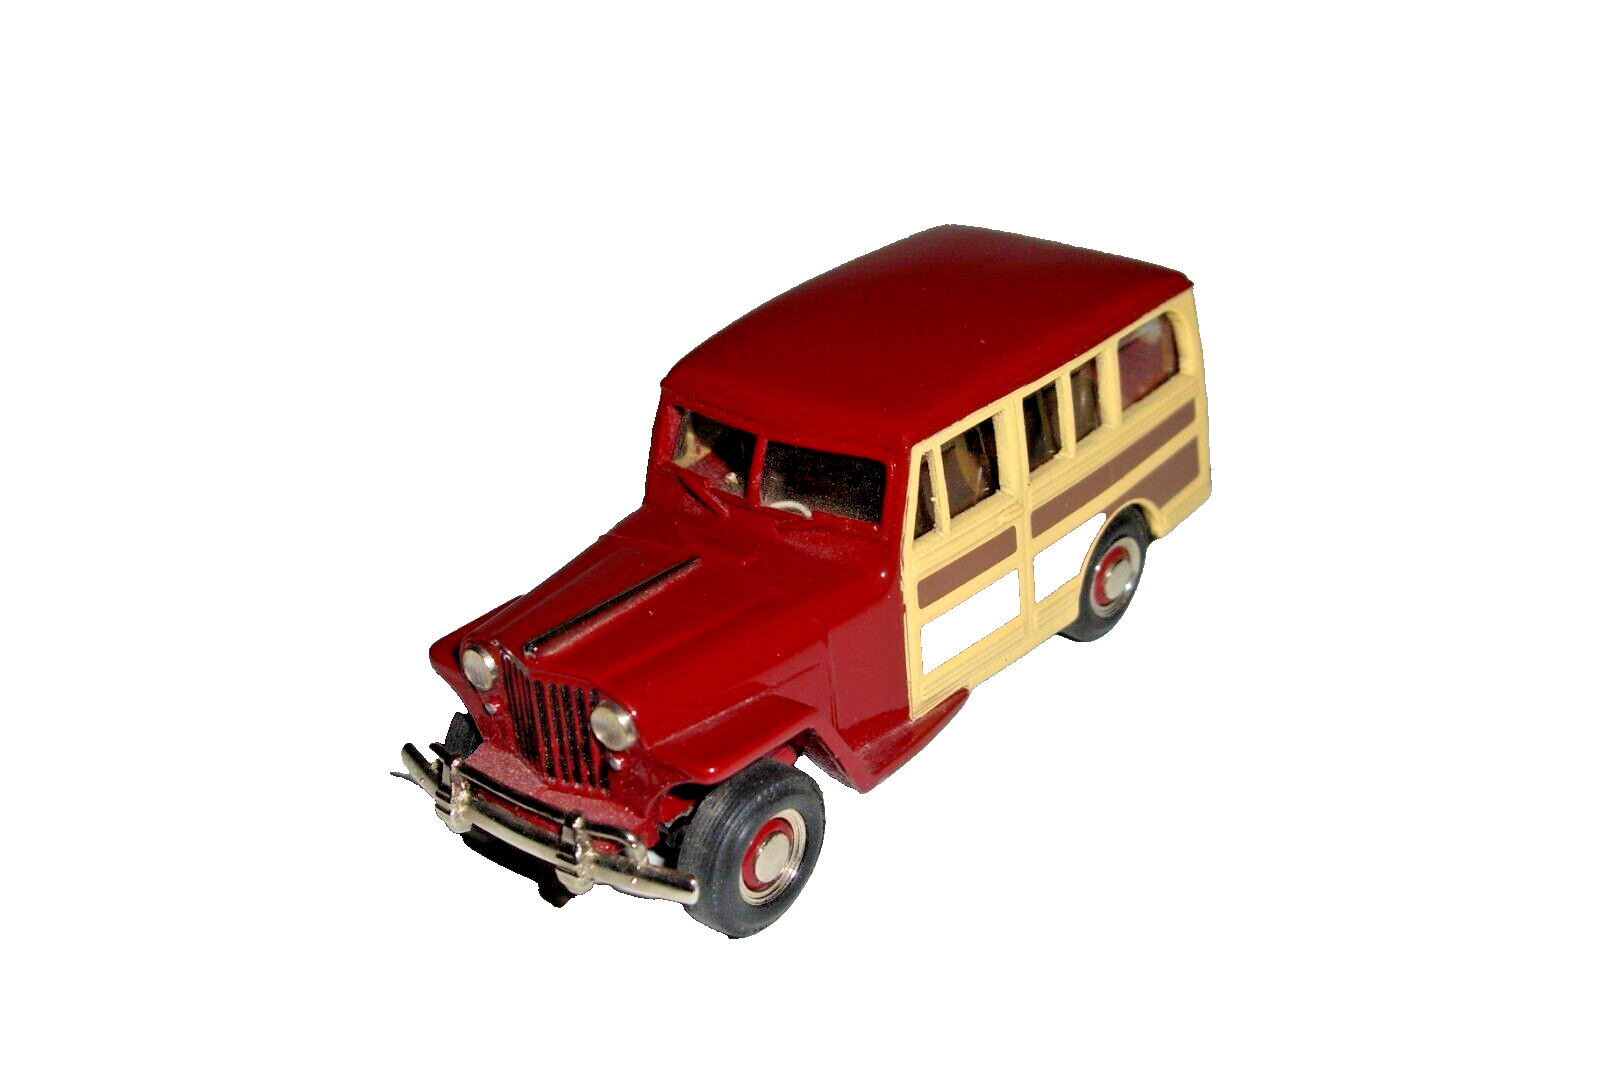 Rare U.S. Model Mint US-7 1949 Willys  Jeep Station Wagon in Luzon Red,